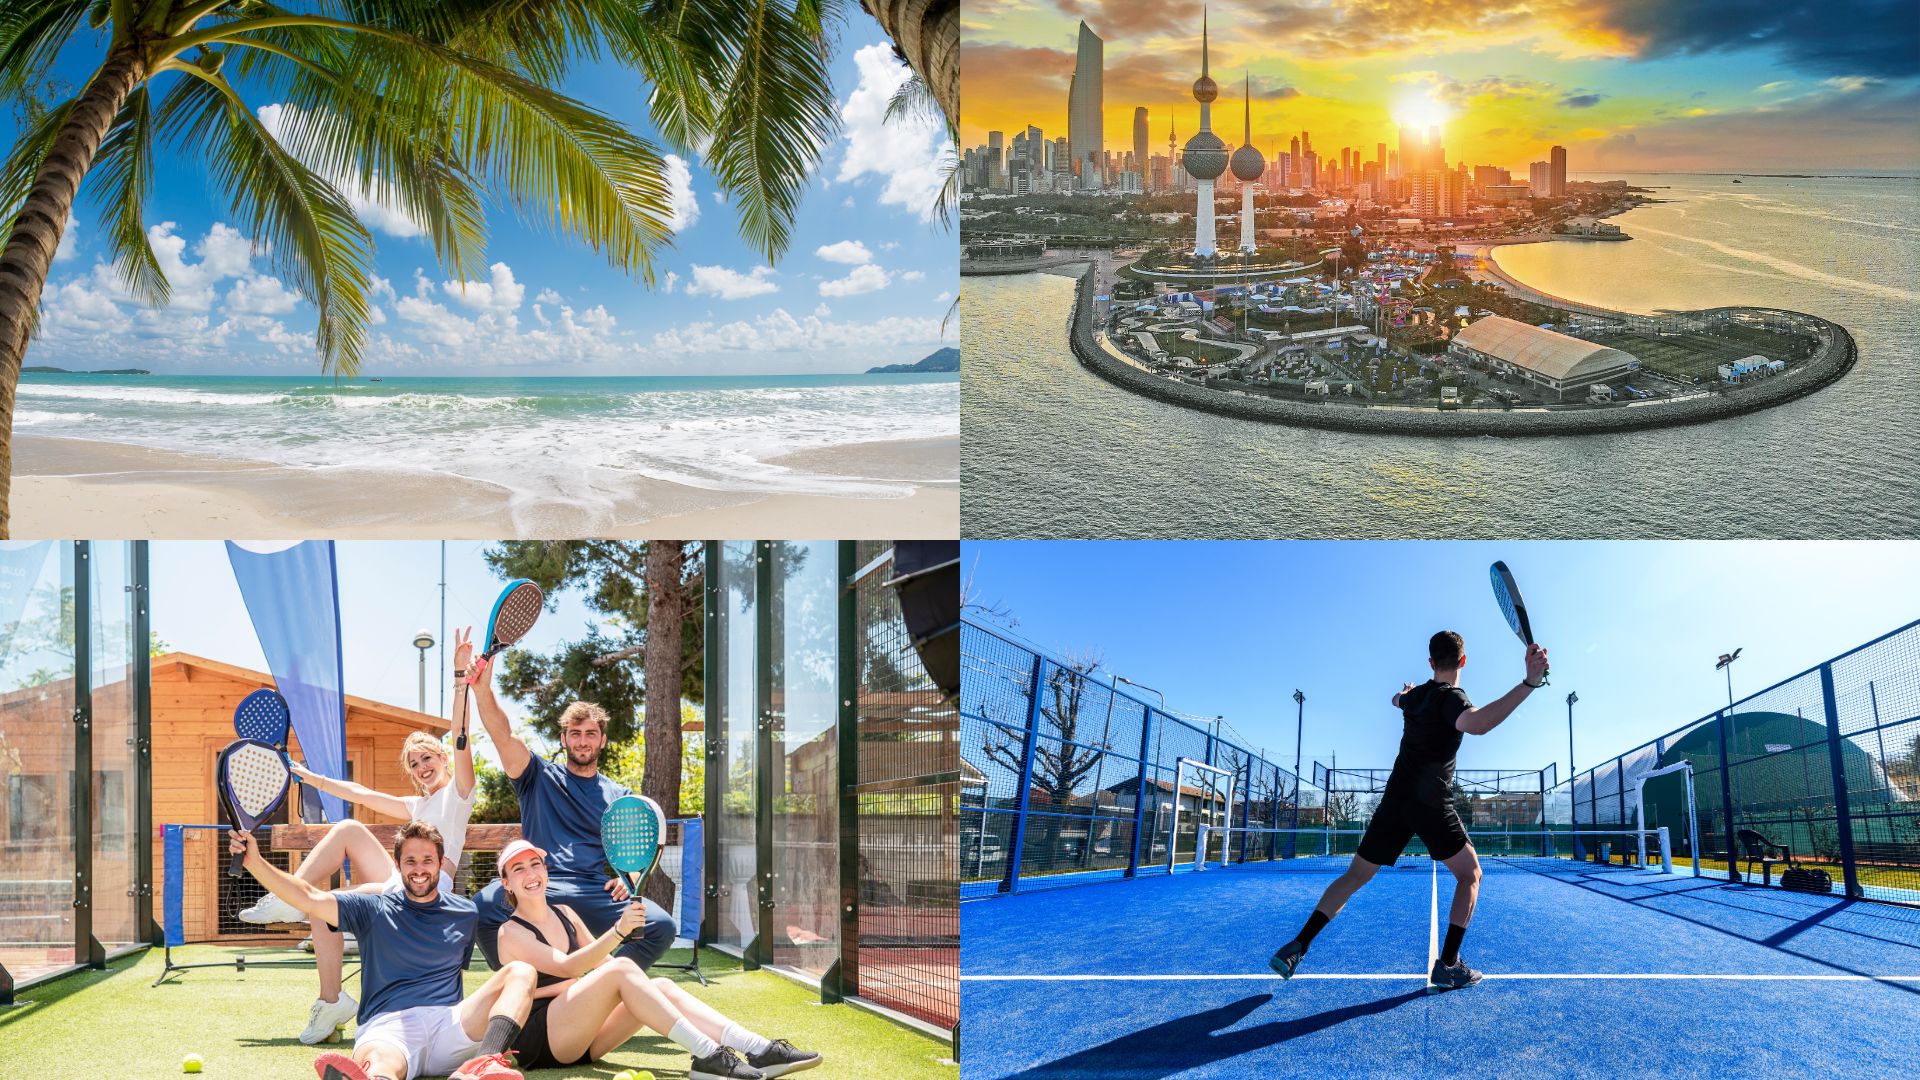 Coach of padel in St-Martin or Kuwait, are you interested?